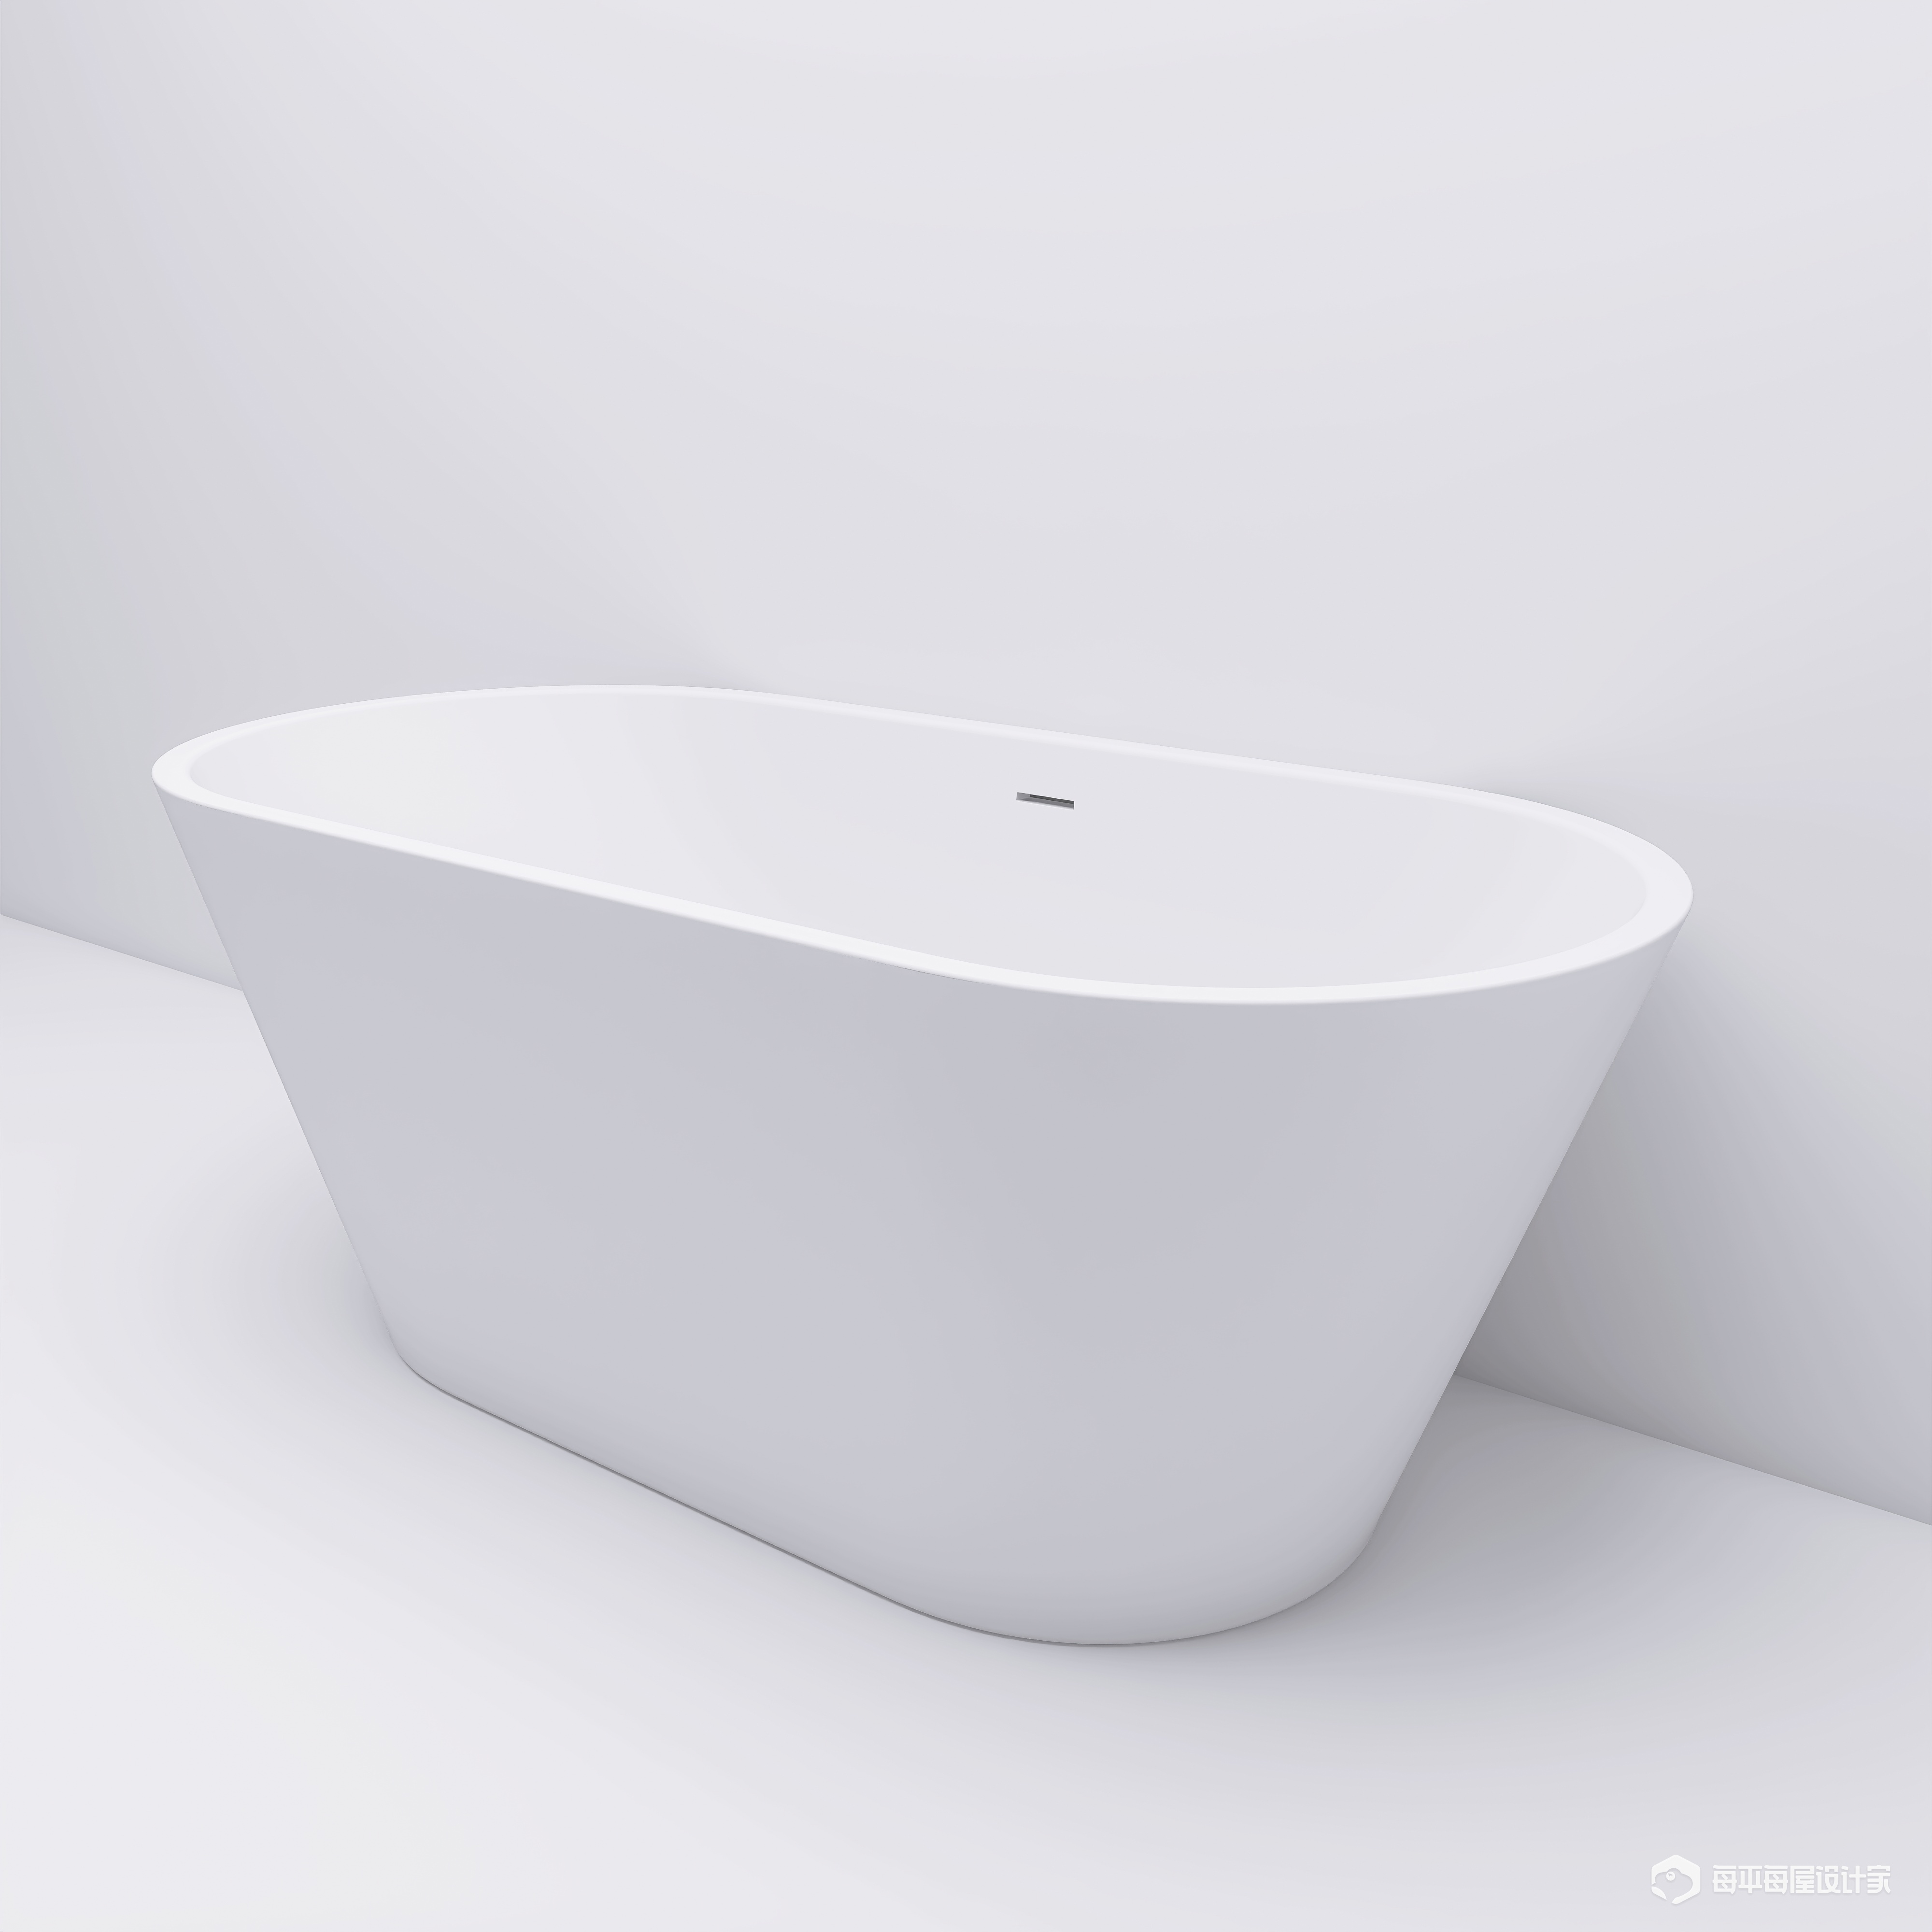 55" Acrylic Free Standing Tub - Classic Oval Shape Soaking Tub, Adjustable Freestanding Bathtub with Integrated Slotted Overflow and Chrome Pop-up Drain Anti-clogging Gloss White-CASAINC